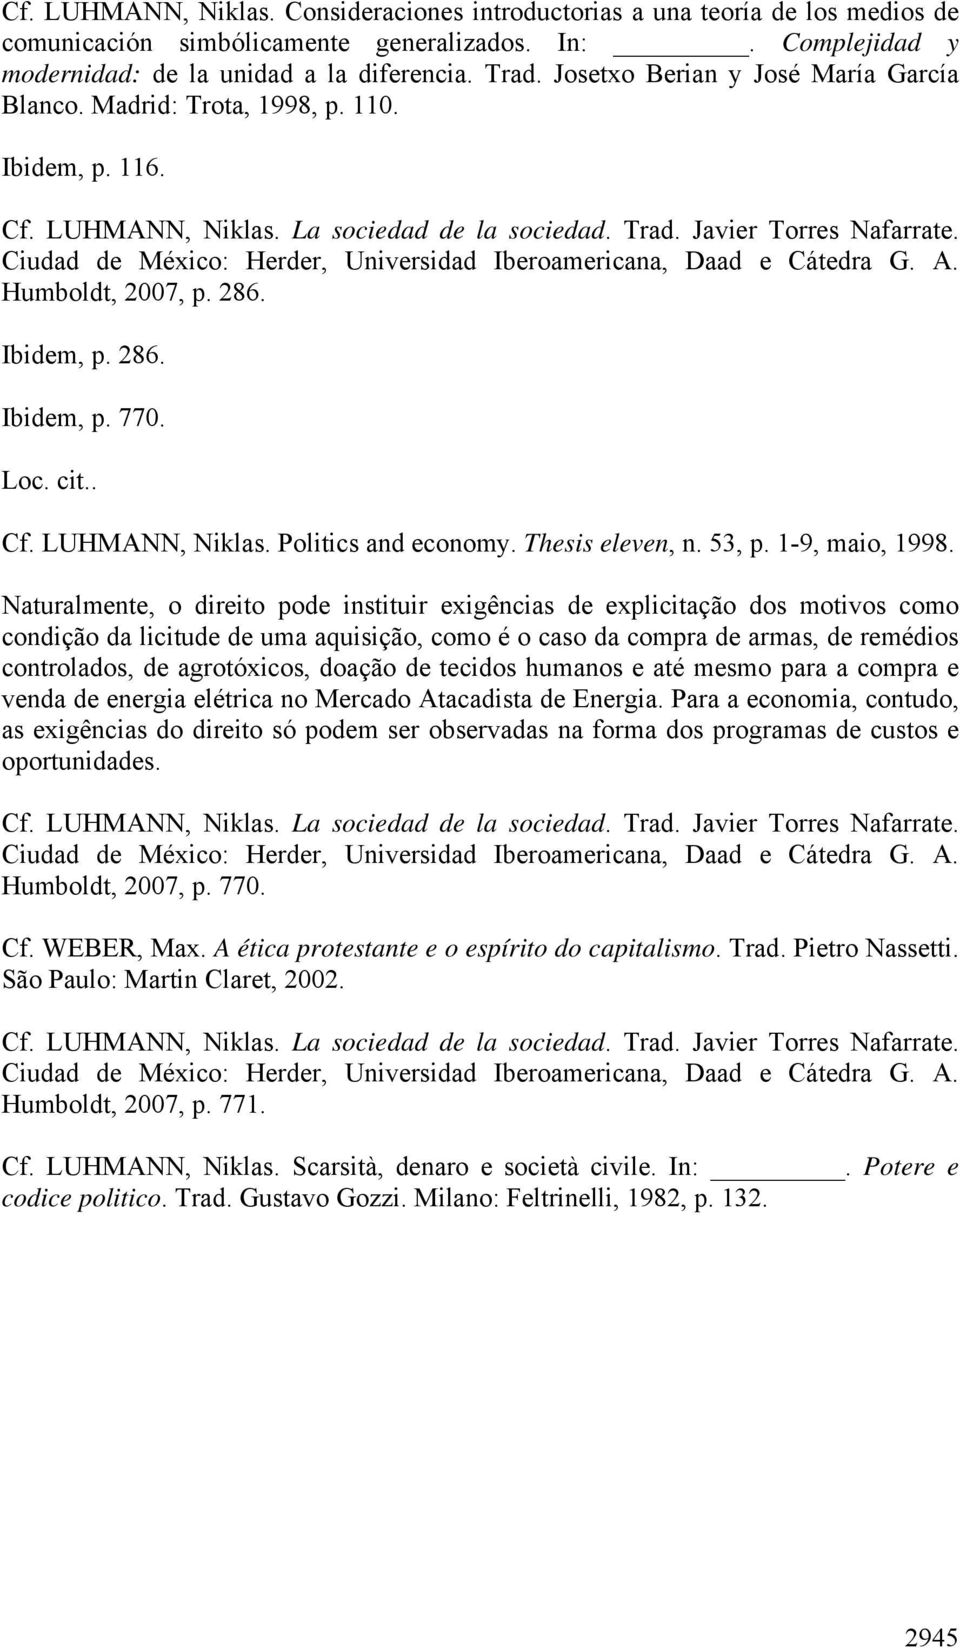 Thesis eleven, n. 53, p. 1-9, maio, 1998.